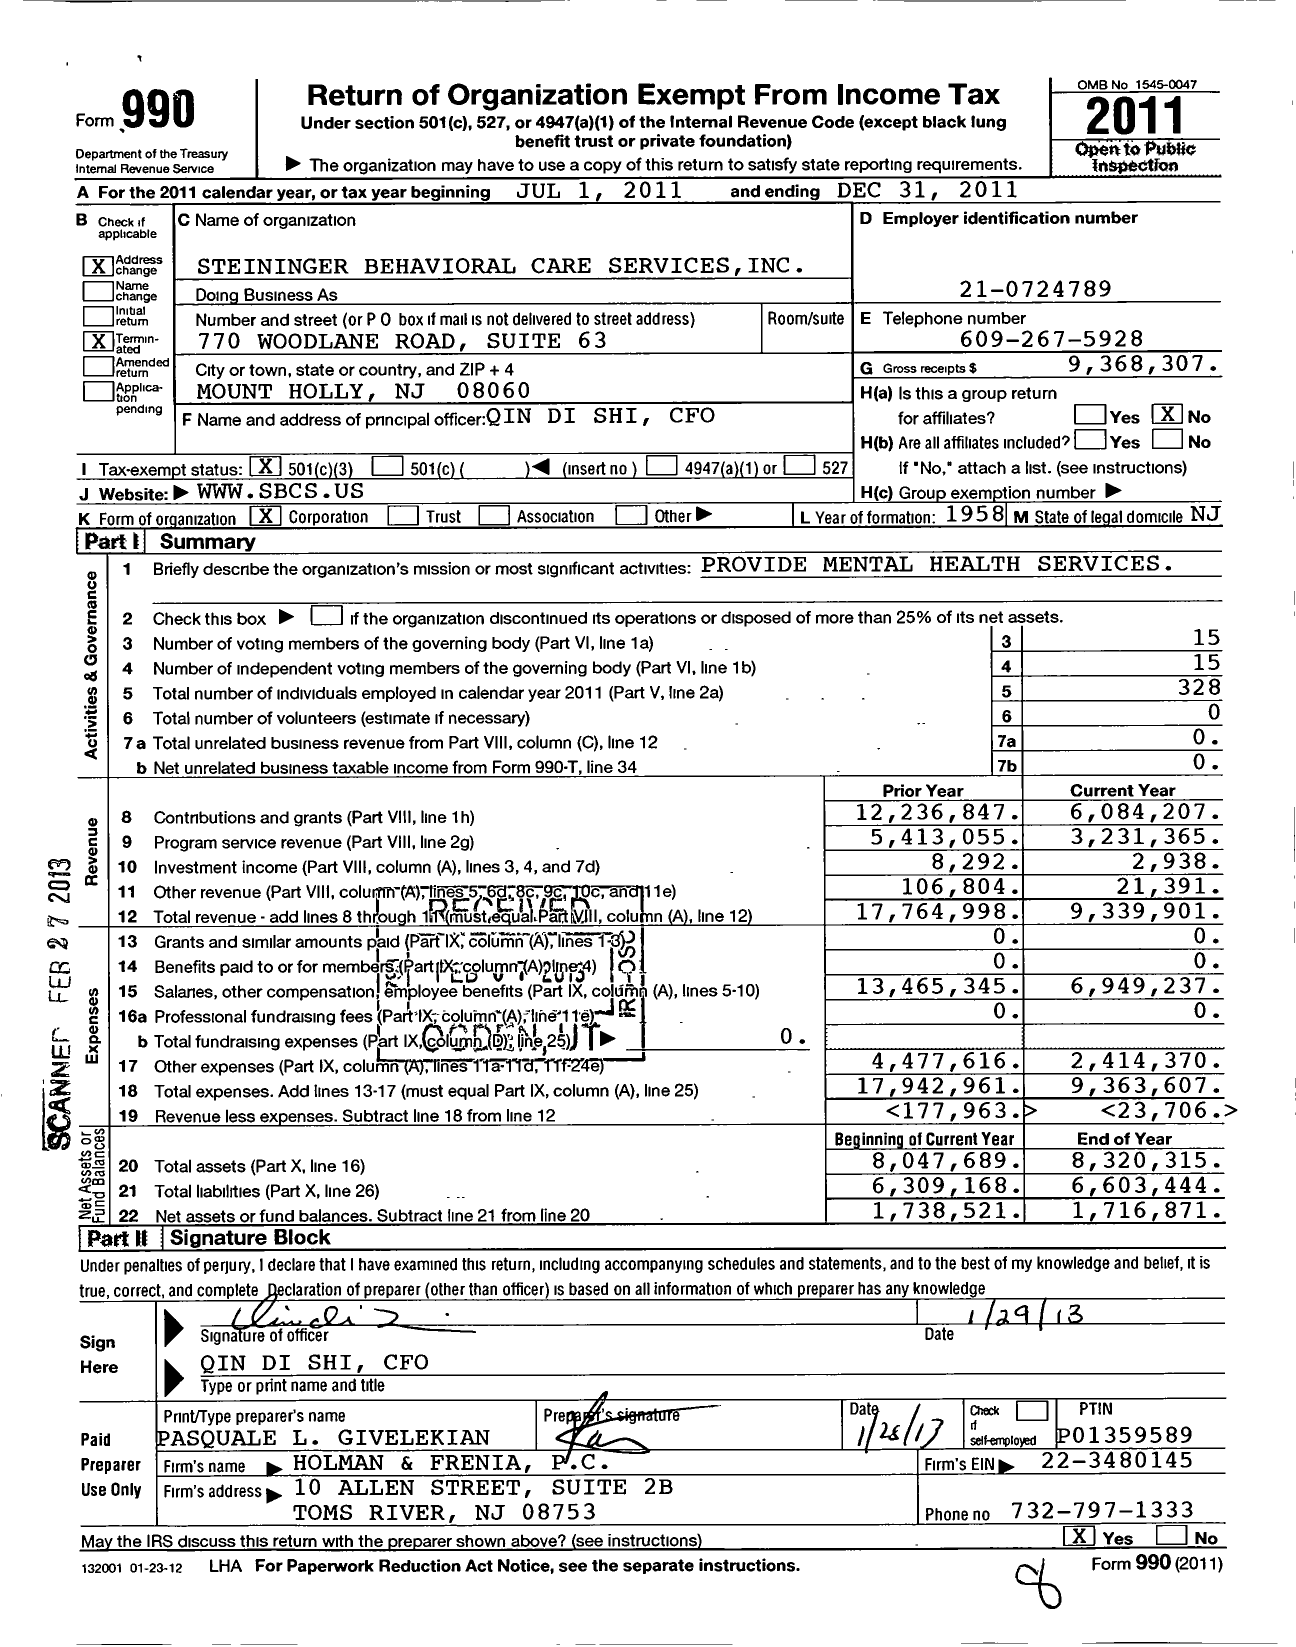 Image of first page of 2011 Form 990 for Steininger Behavioral Care Services